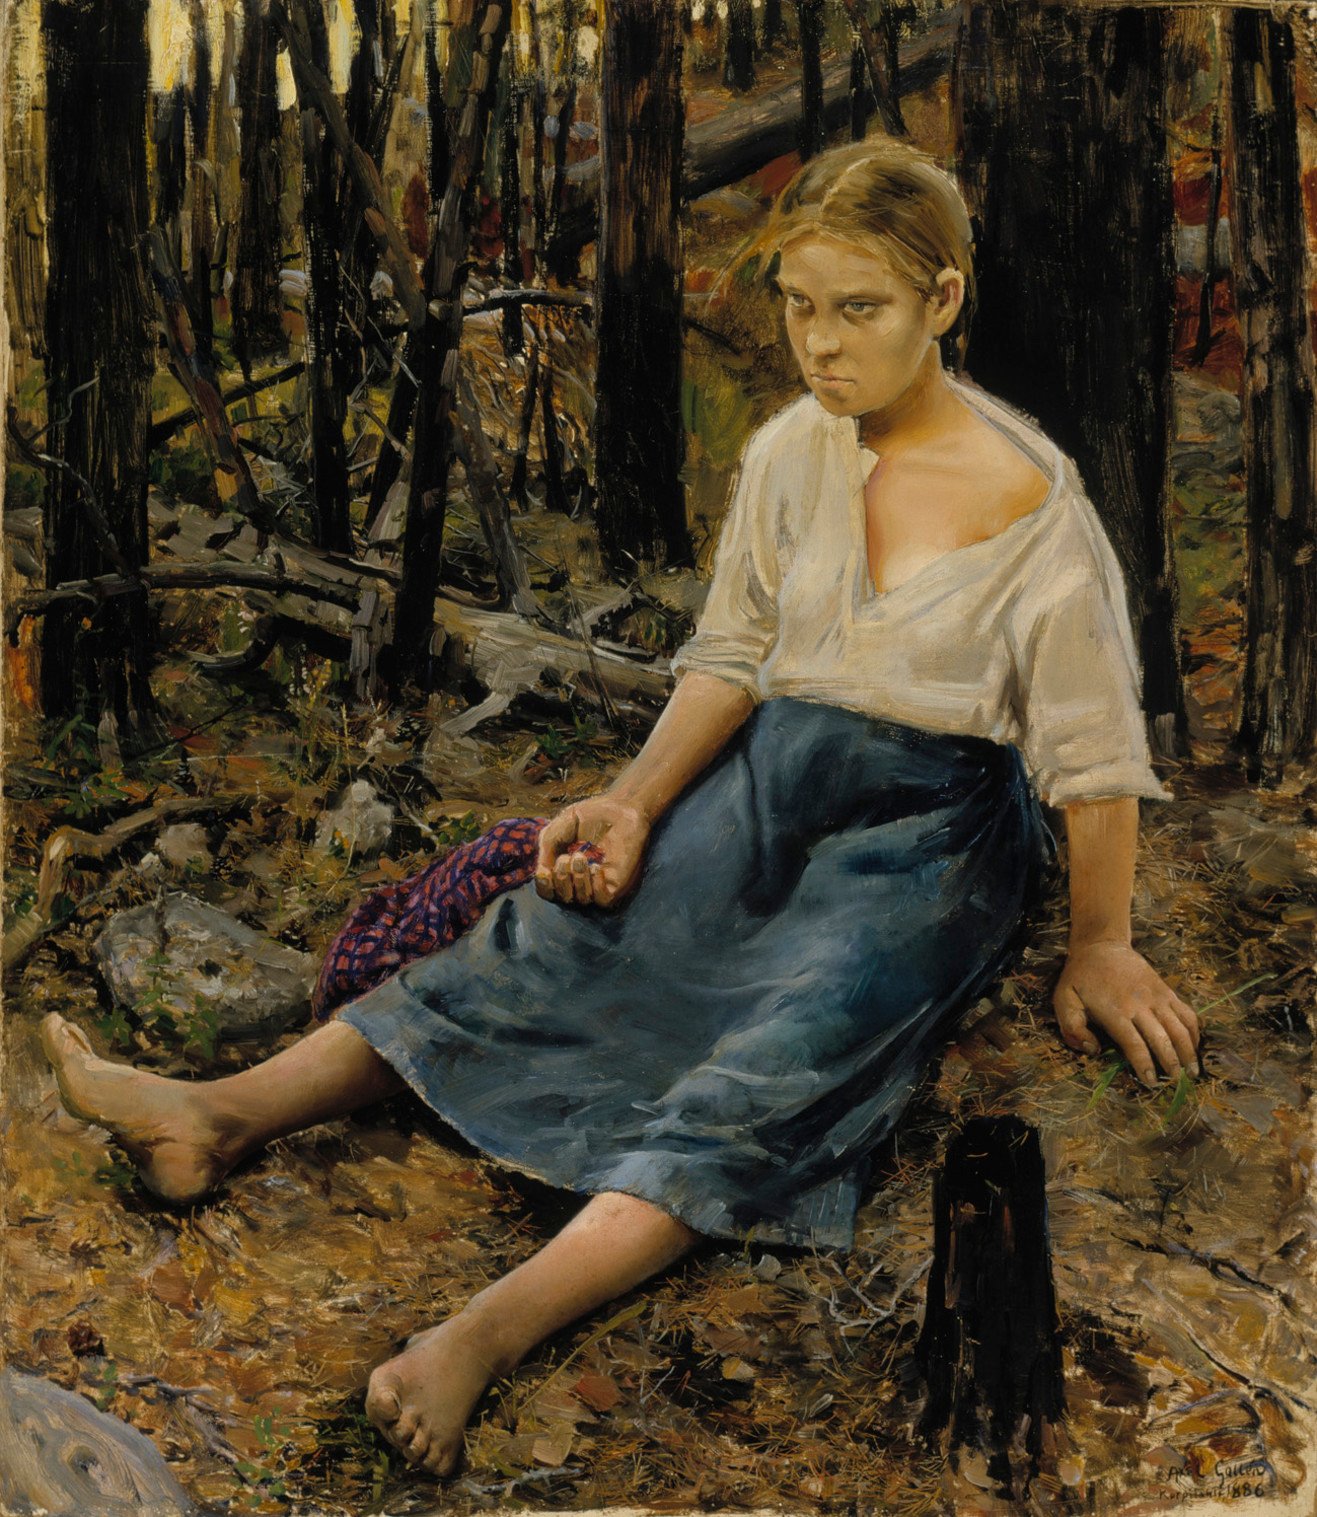 A young girl sitting in a dry forest